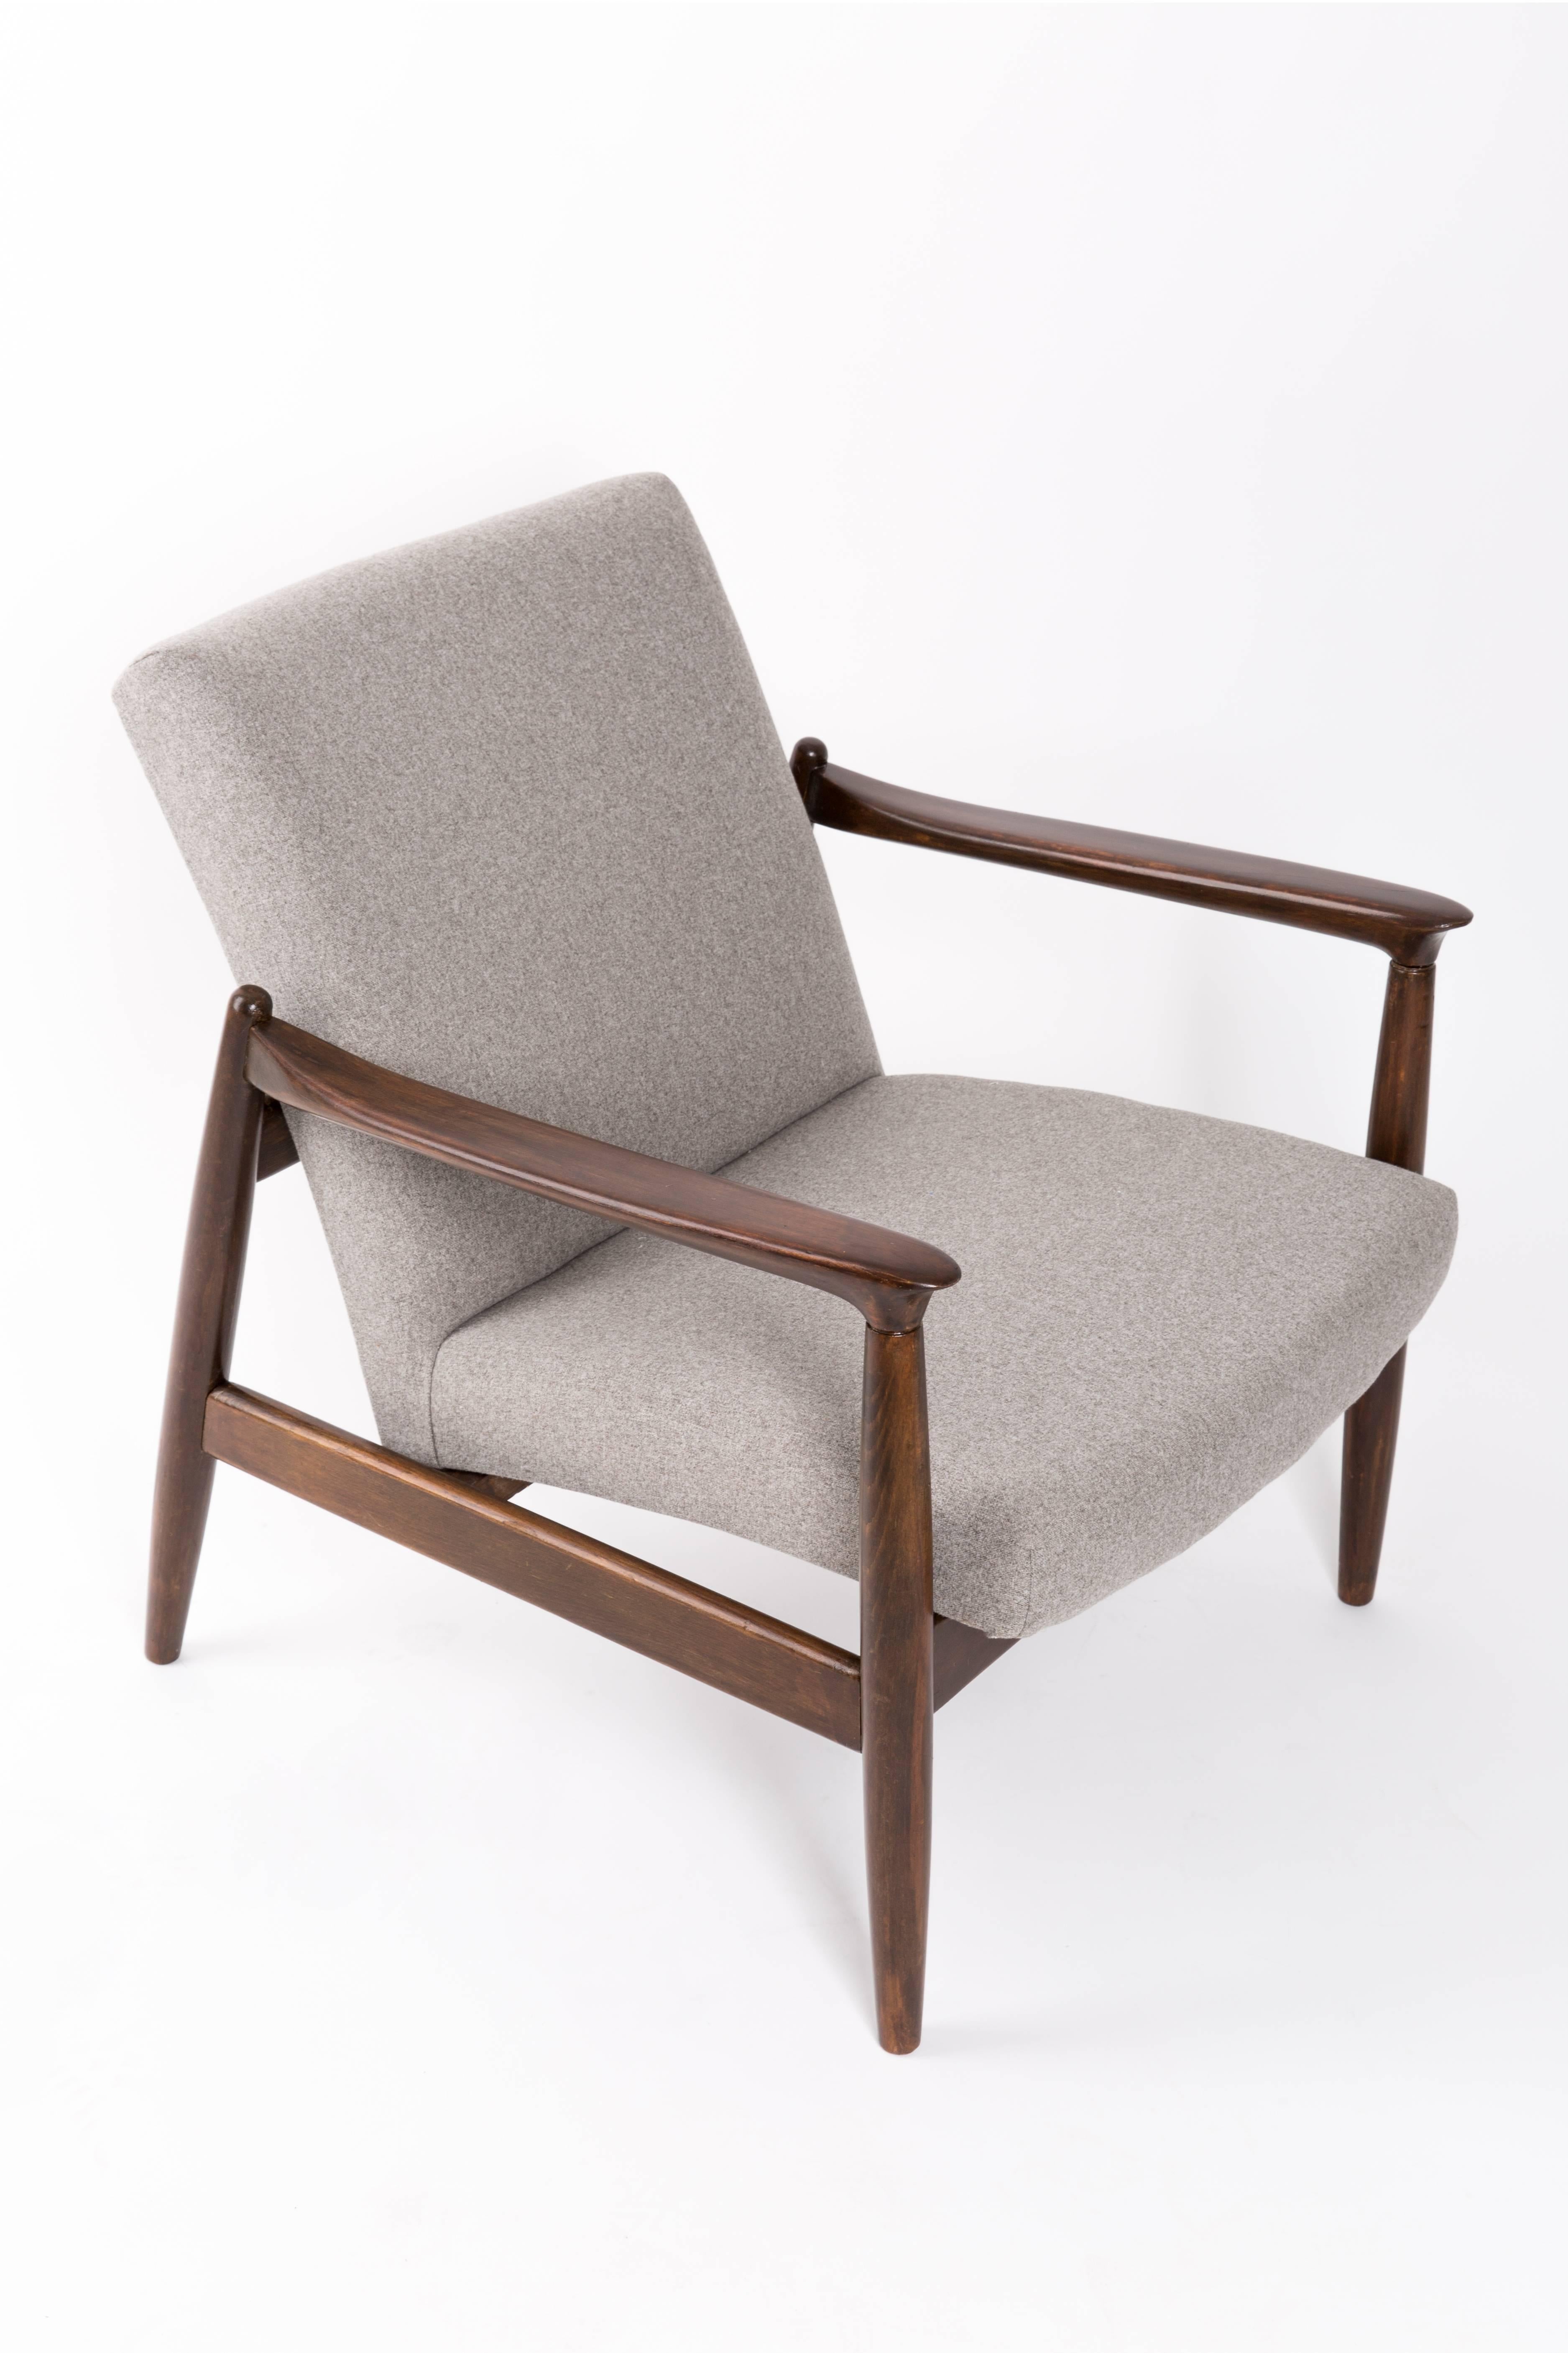 A pair of beige armchairs, designed by Edmund Homa. The armchairs were made in the 1960s in the Gosciecinska Furniture Factory. They are made from solid beechwood. The GFM type armchair is regarded one of the best Polish armchair design from the